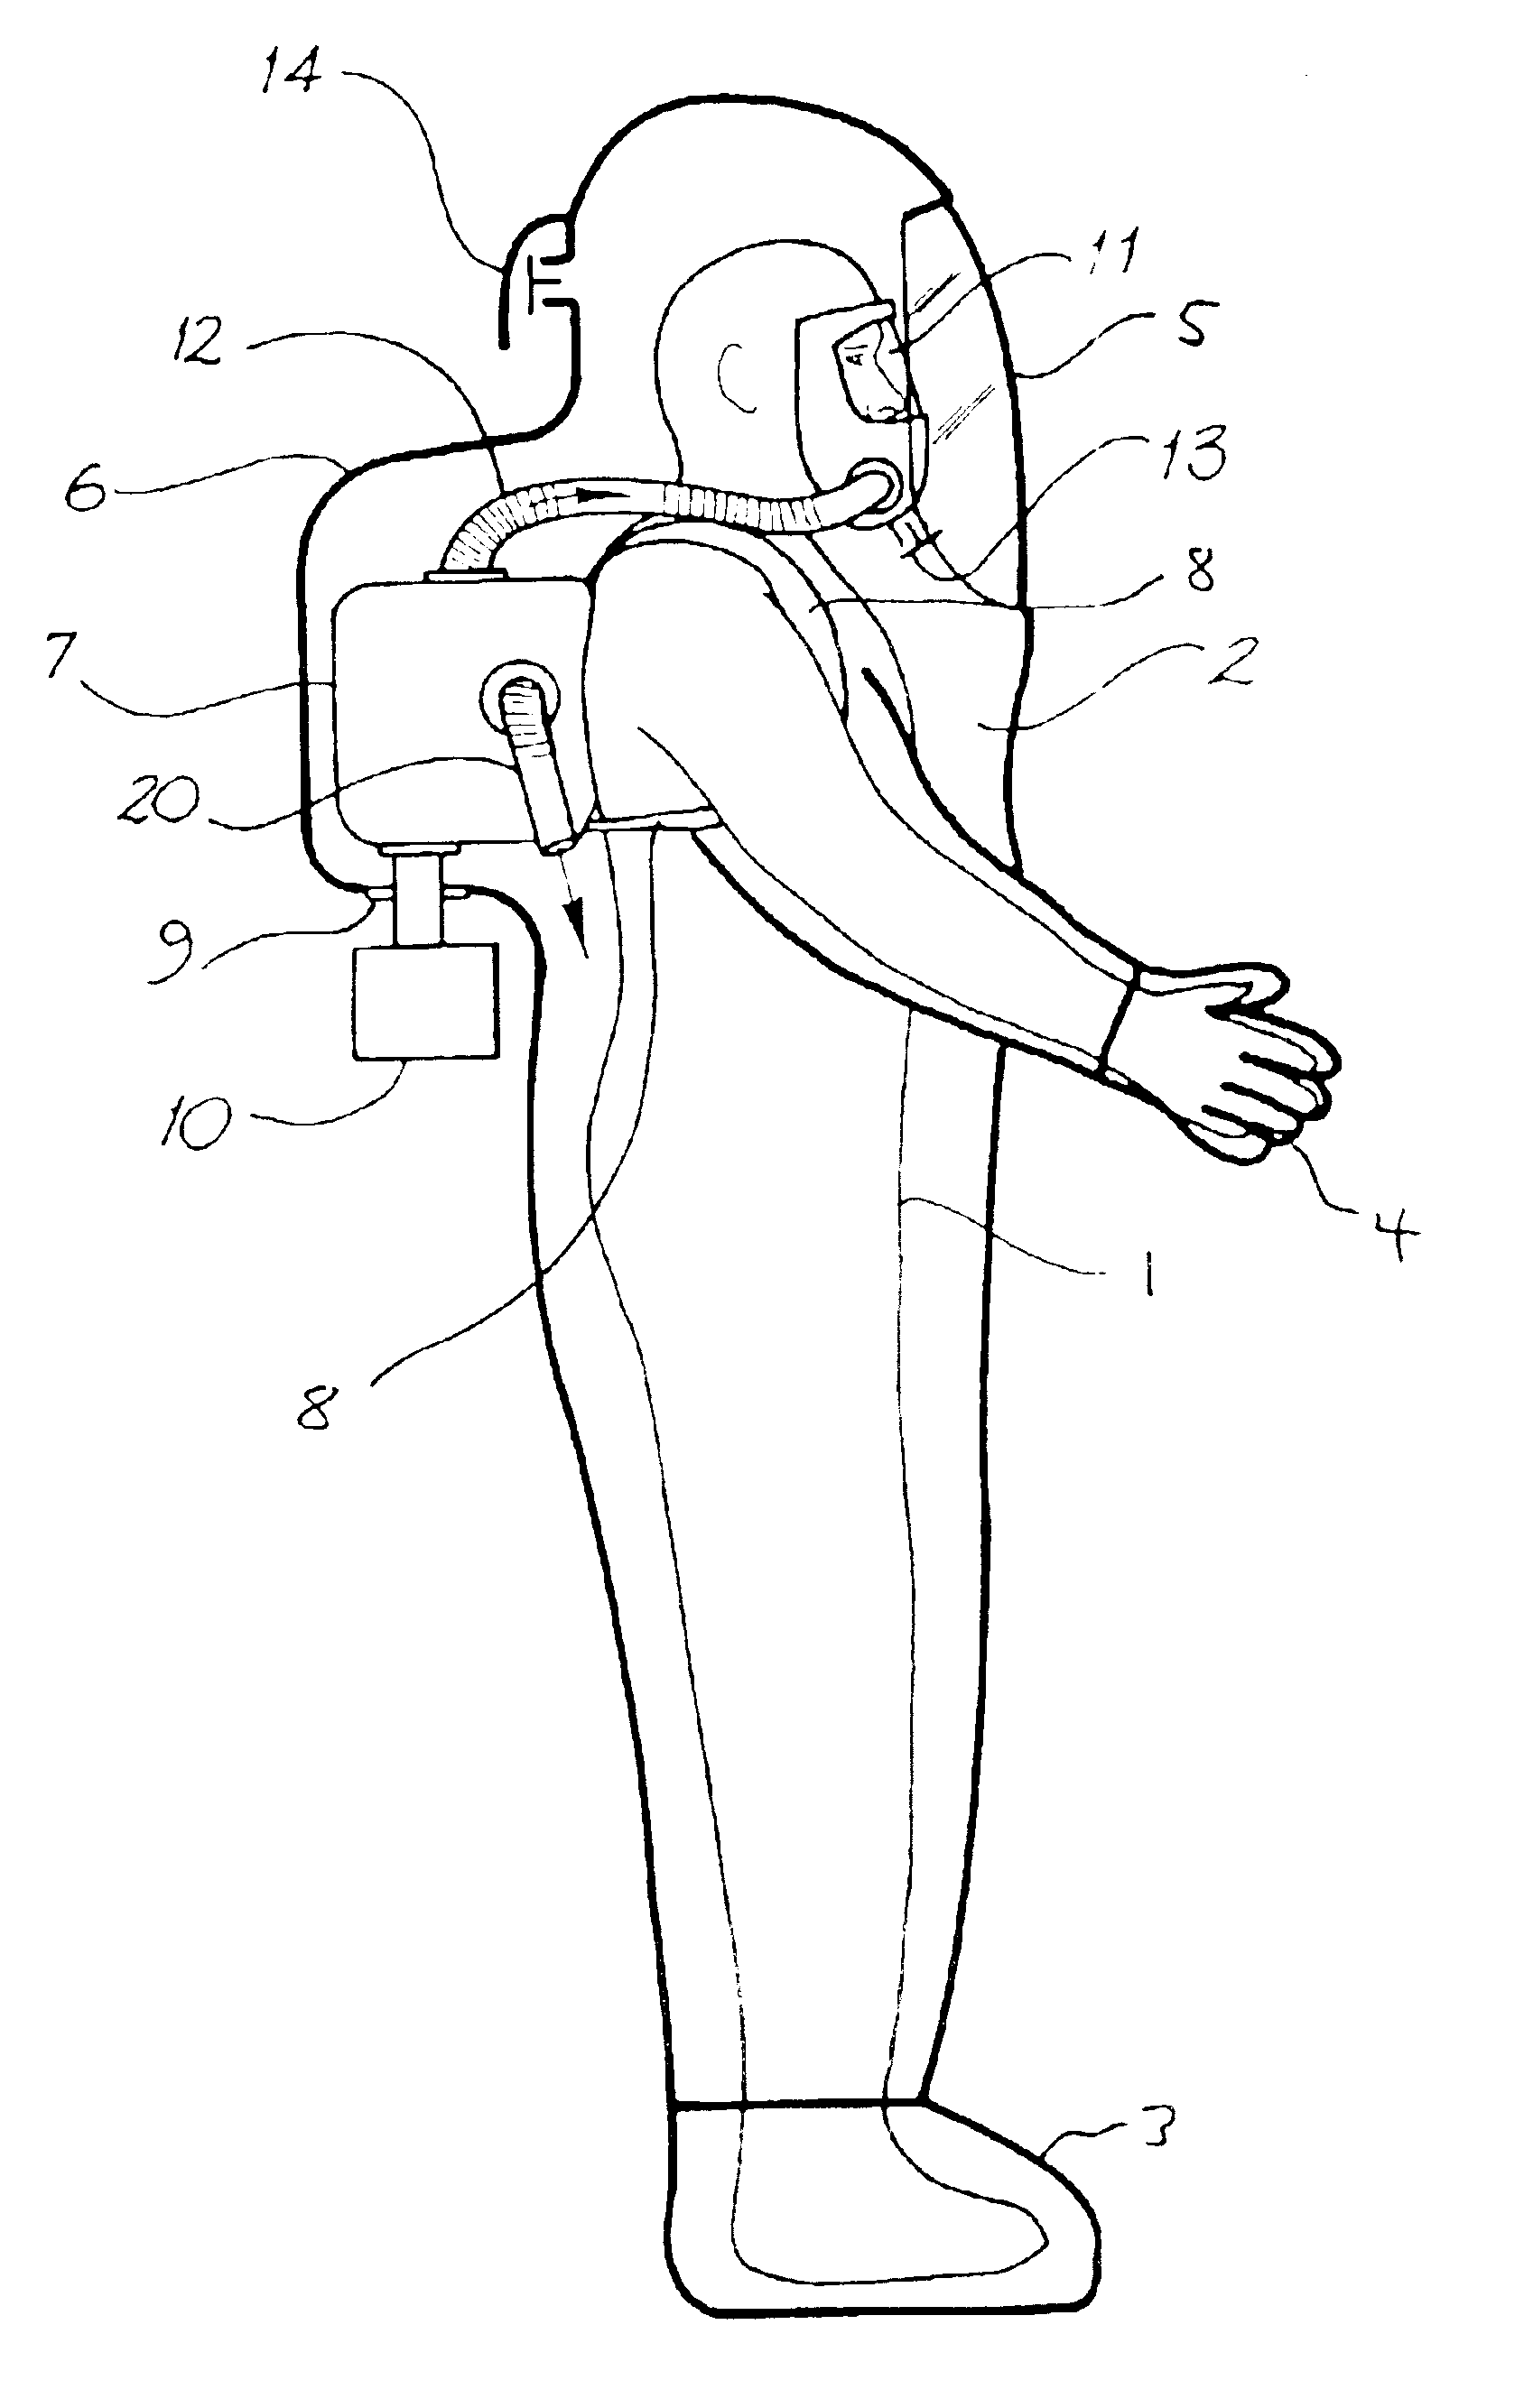 Ventilation system for a protective suit